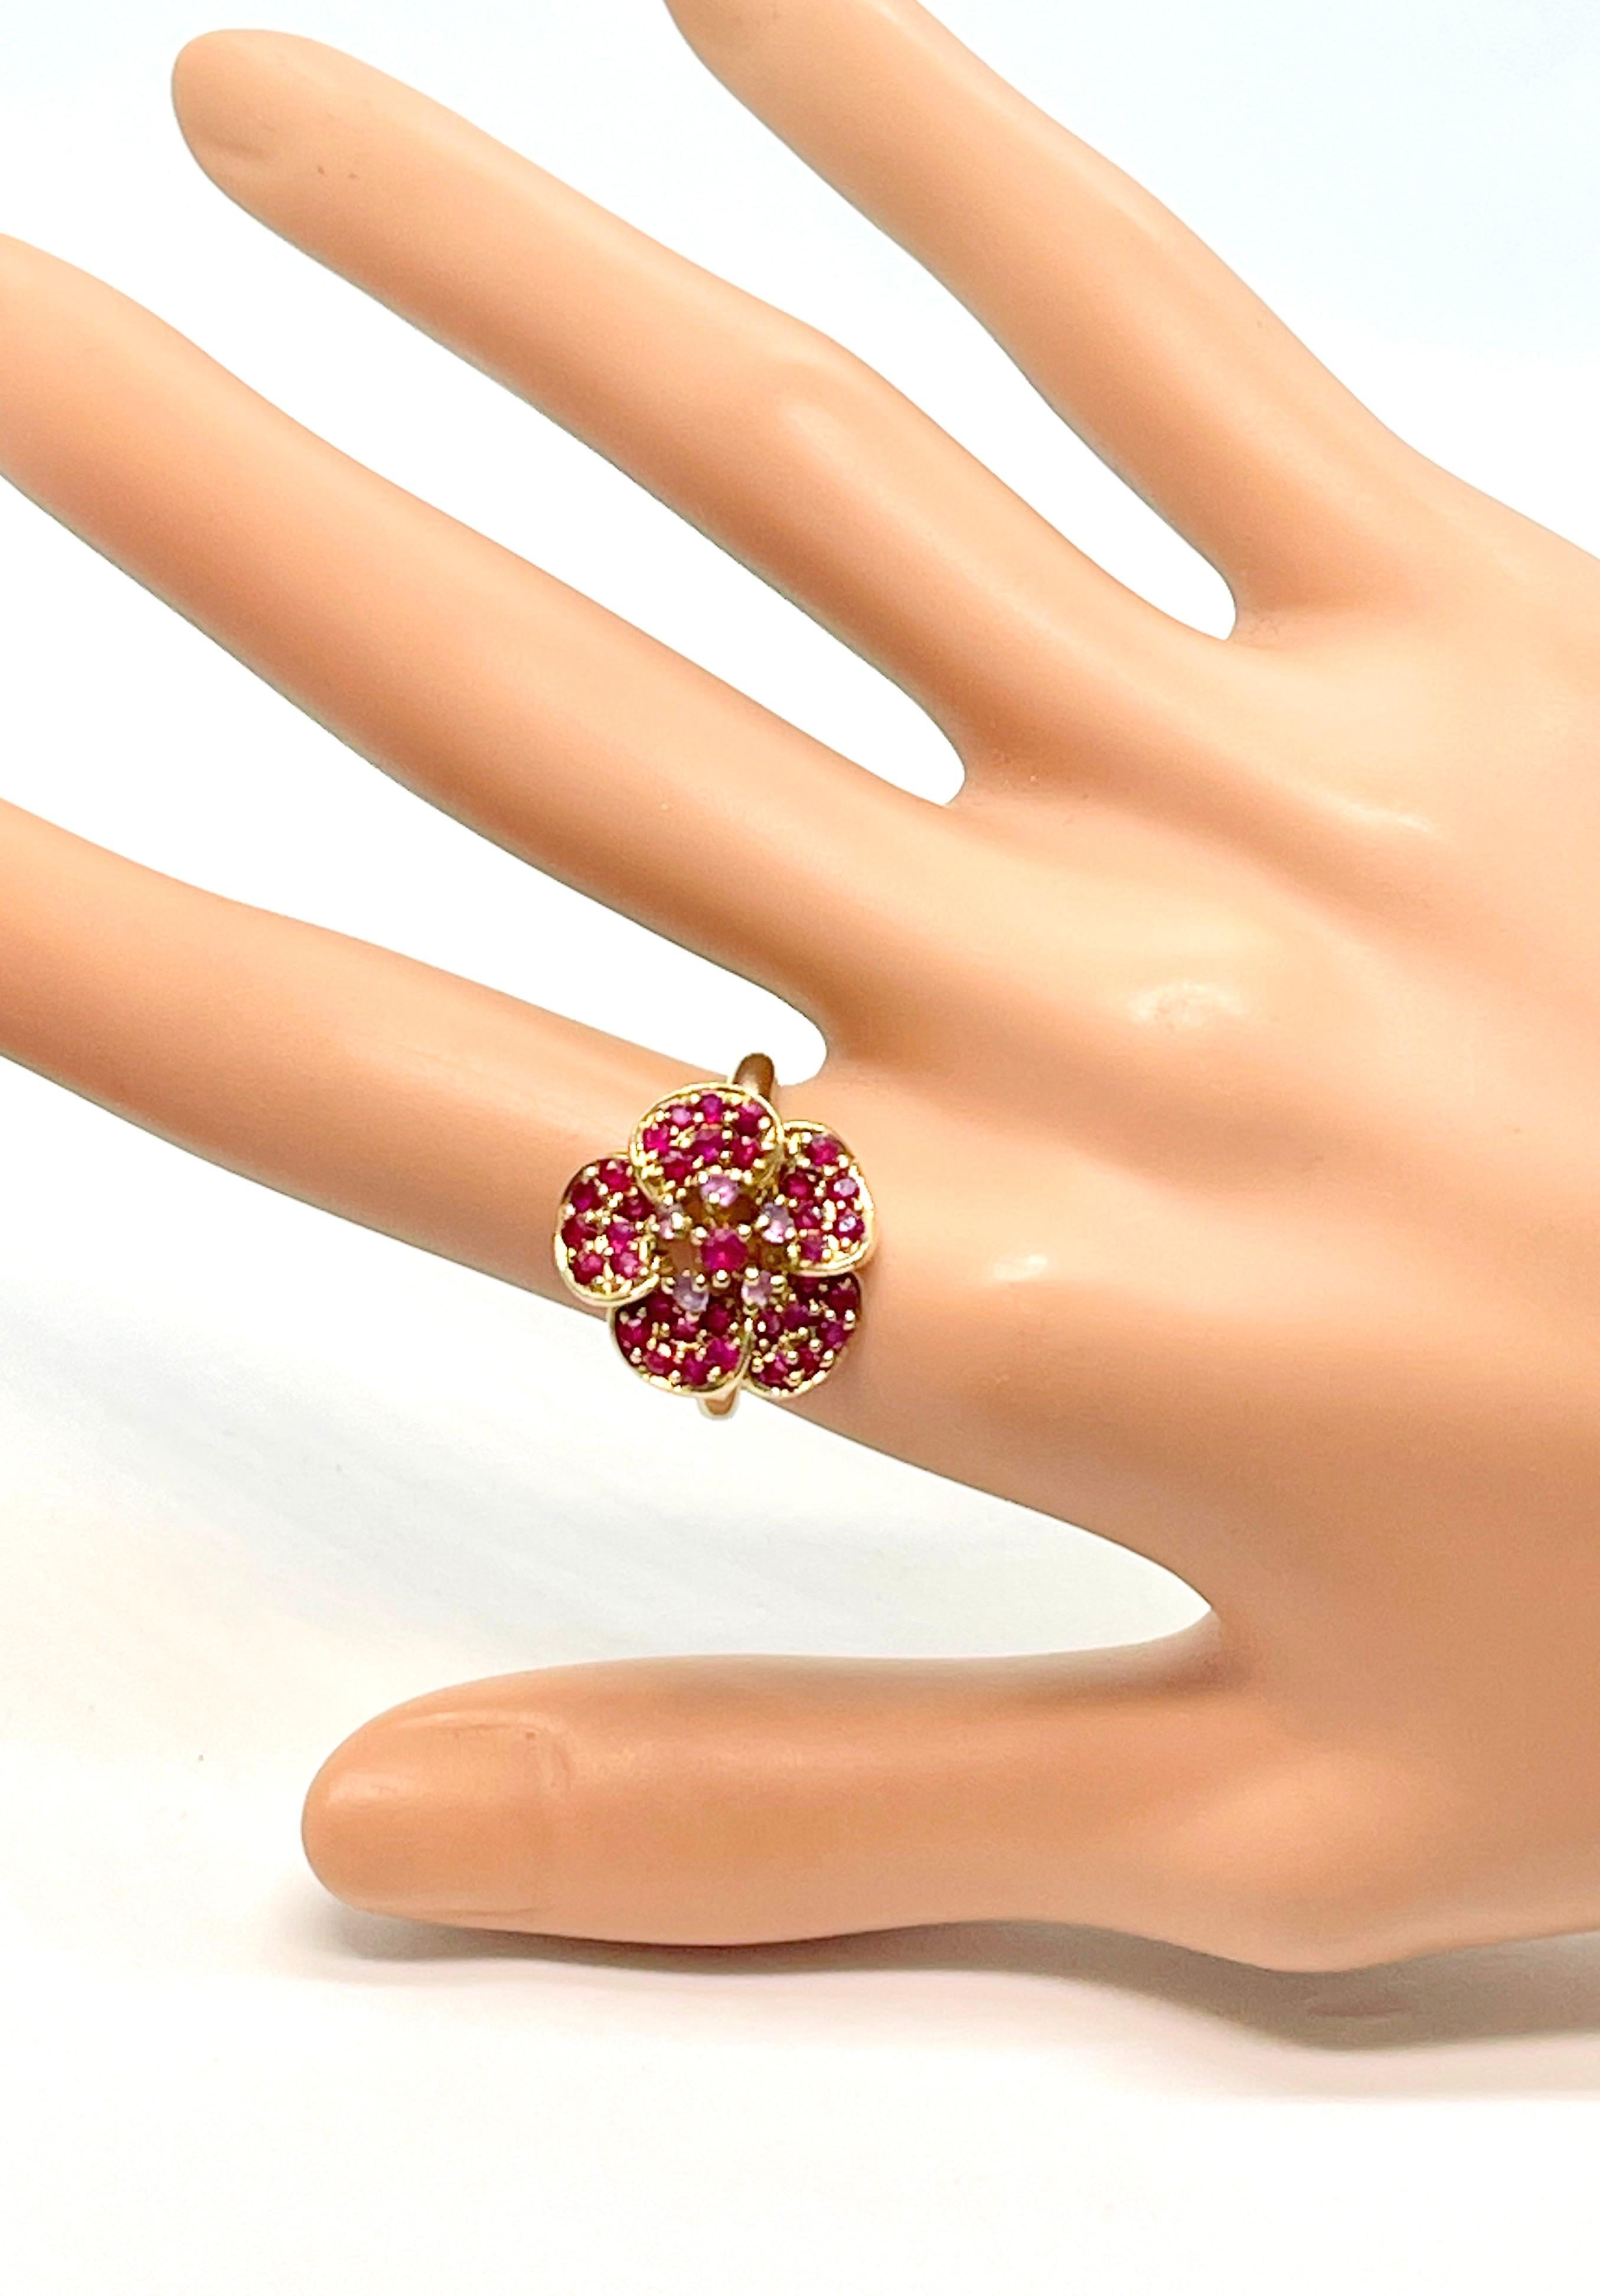 9ct Gold Retro Ruby Flower Cluster Ring Valuation Hallmarked 2006 Birmingham In Good Condition For Sale In Mona Vale, NSW